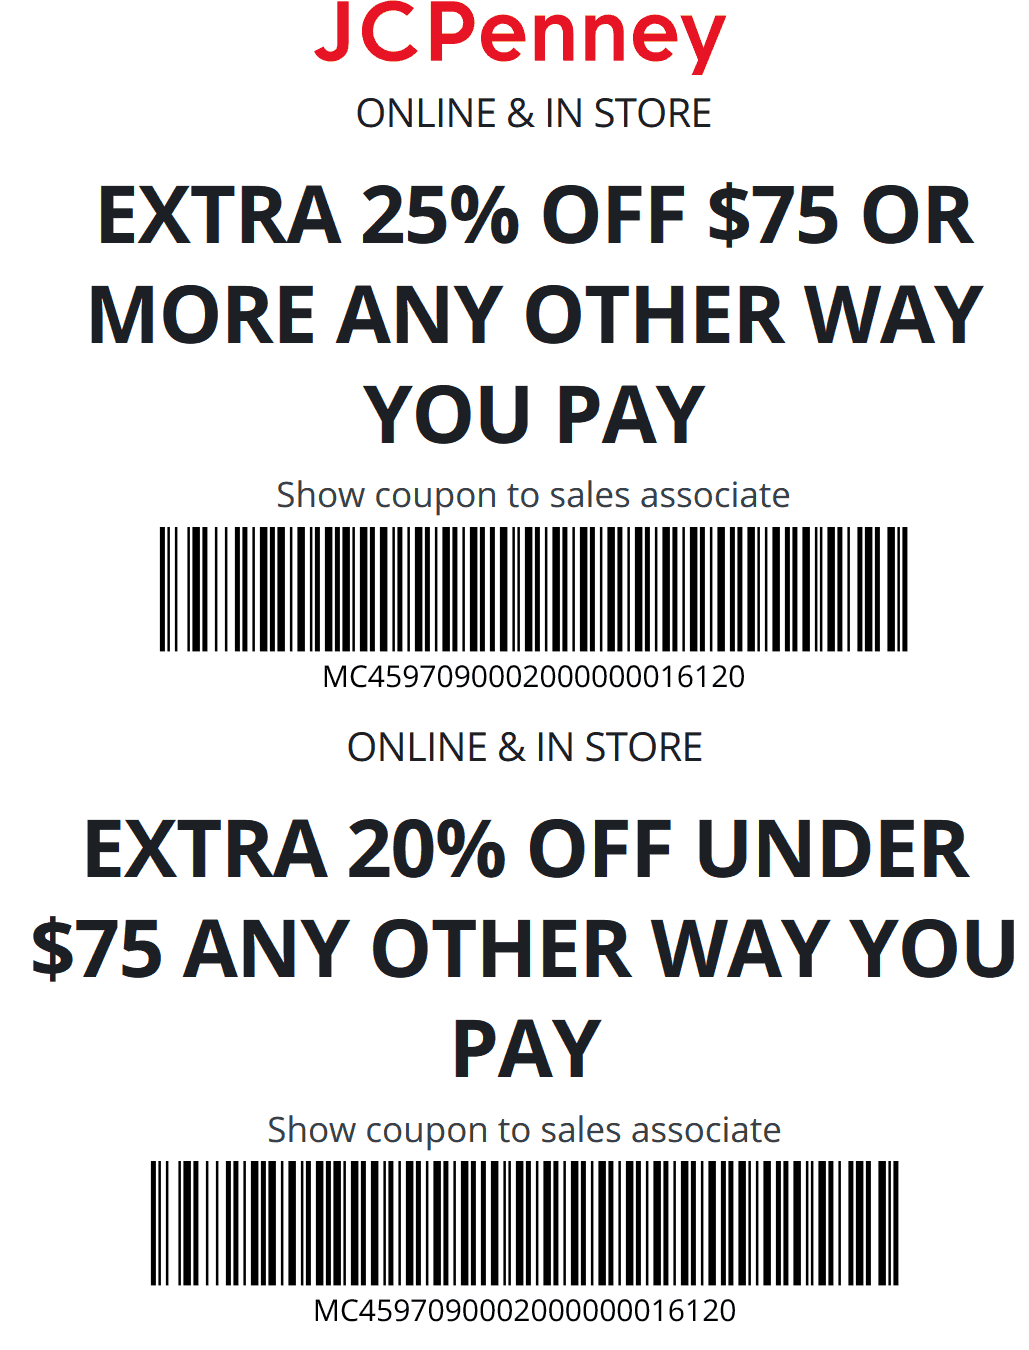 jcpenney 20 off coupon code